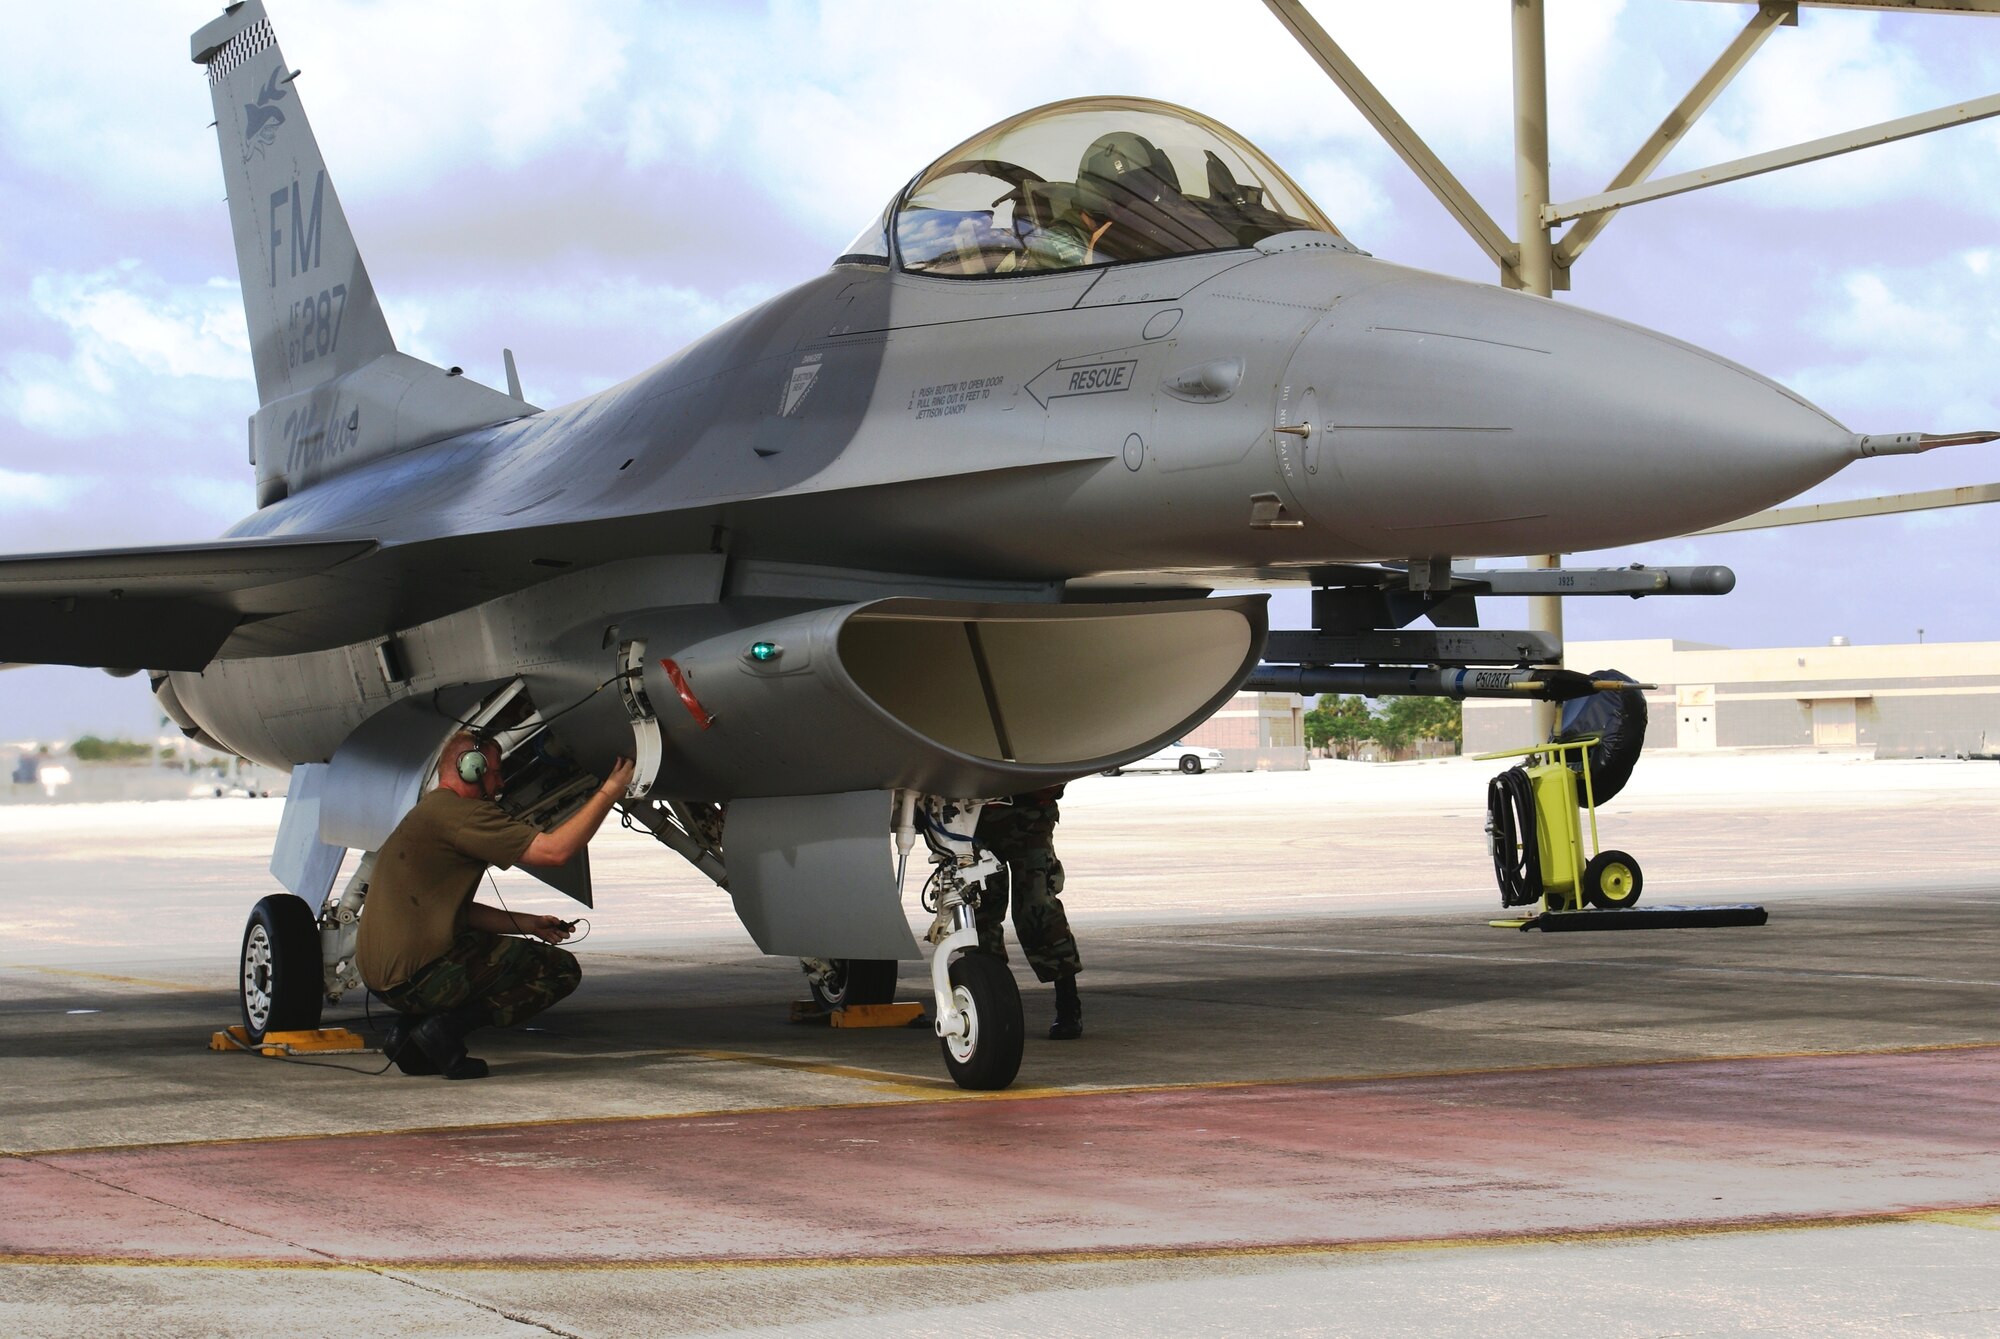 Maintenance personnel from the 482nd Fighter Wing, Homestead Air Reserve Base, Fla., perform pre-flight inspections on an F-16 prior to departure Oct. 30, 2007.  A total of 24 F-16 fighter jets left Homestead ARB for Dobbins Air Reserve Base, Ga., as part of preparations for Tropical Storm Noel.  The early evacuation allows pilots and maintenance personnel to return home to south Florida in time to care for their families before a storm.  The movement of jets is a precaution to protect this valuable national asset. (U.S. Air Force photo/Tim Norton)
